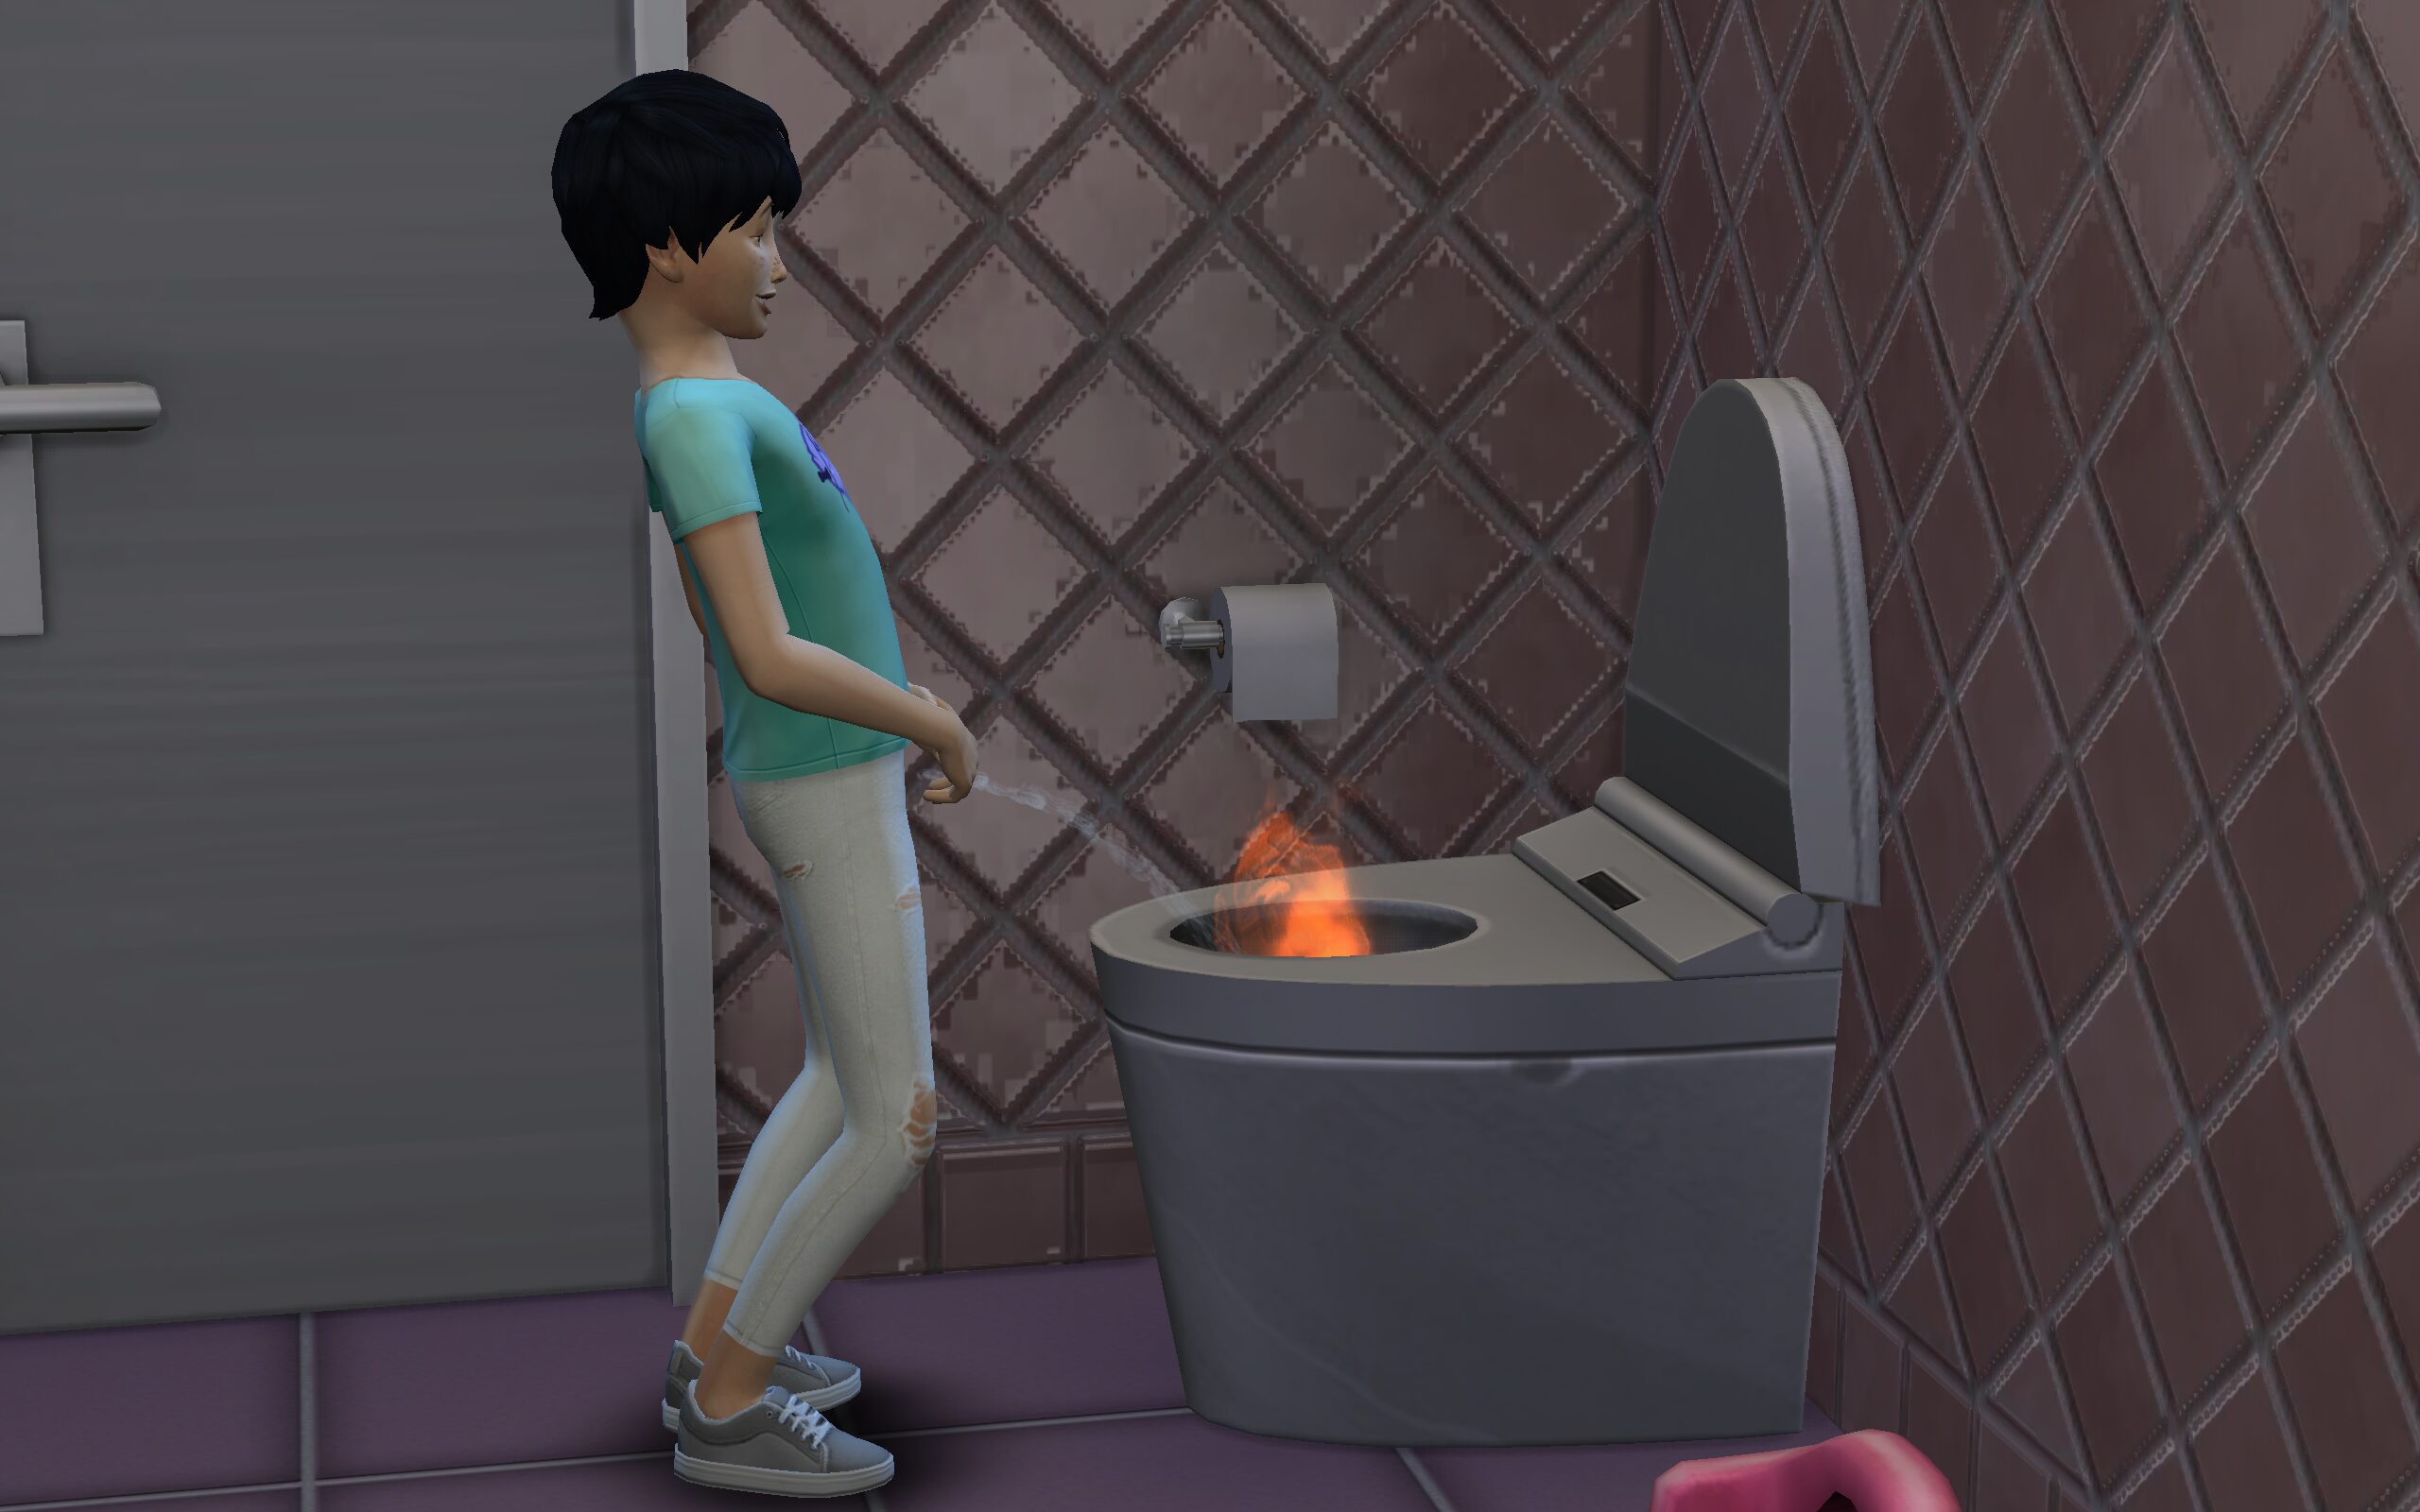 The Sims 4 Players Report Flaming Piss